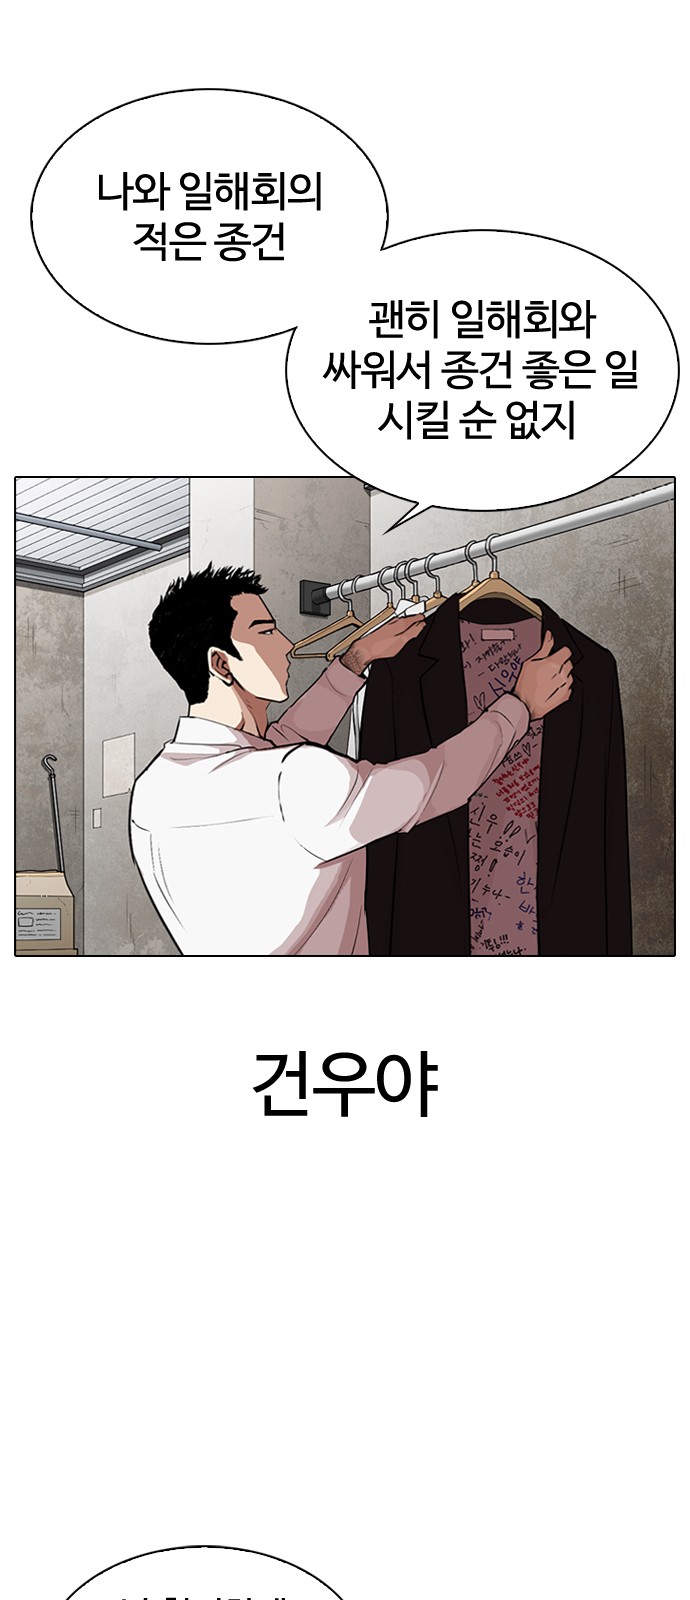 Lookism - Chapter 319 - Page 3